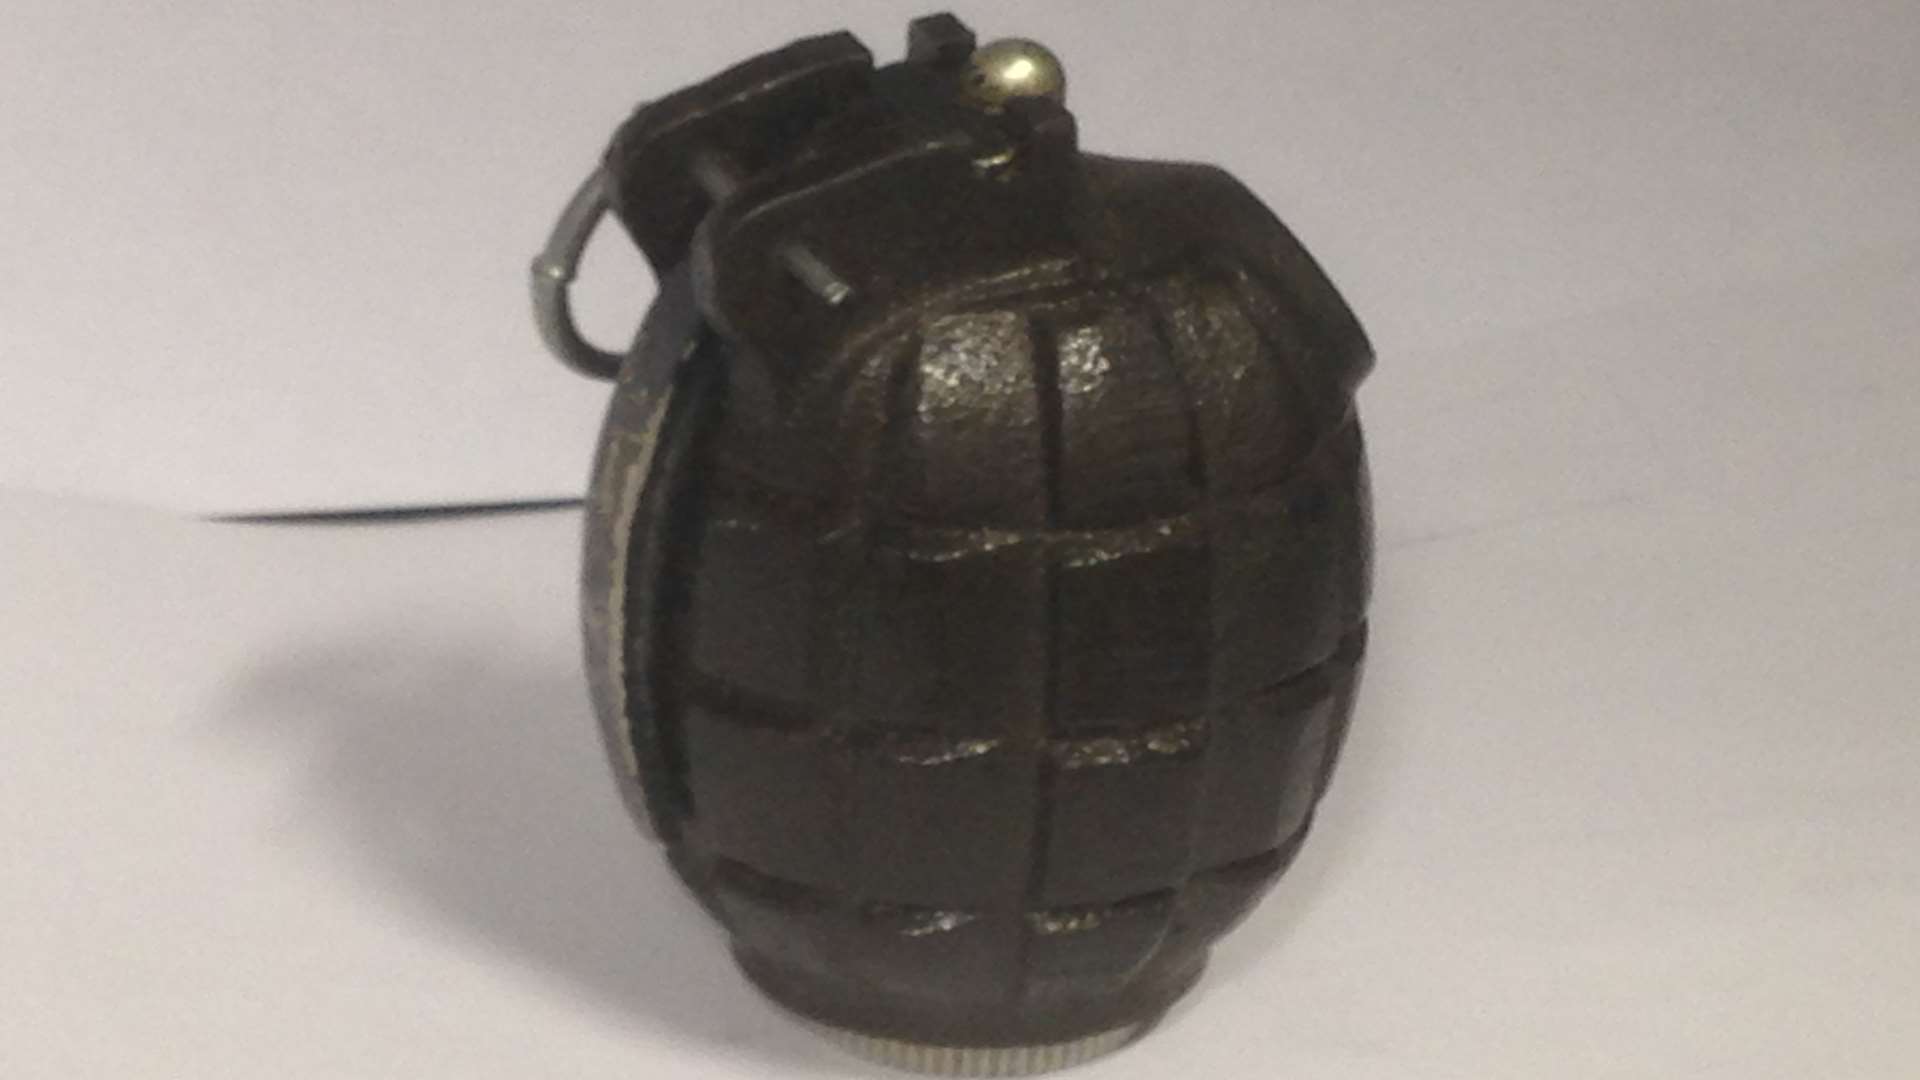 A stock image of a hand grenade